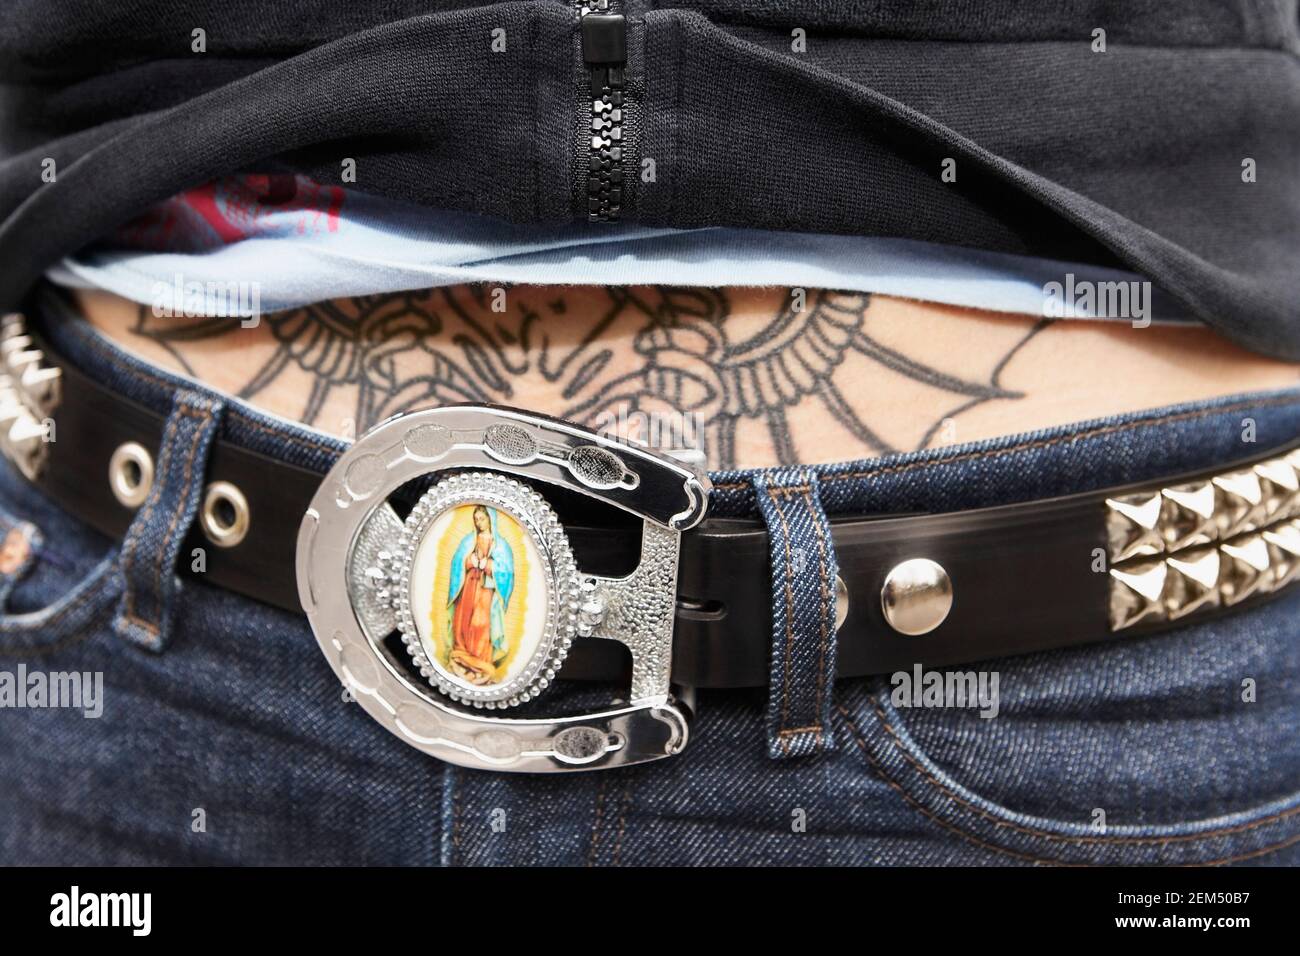 Mid section view of a woman with a belt and a tattoo on her stomach Stock Photo